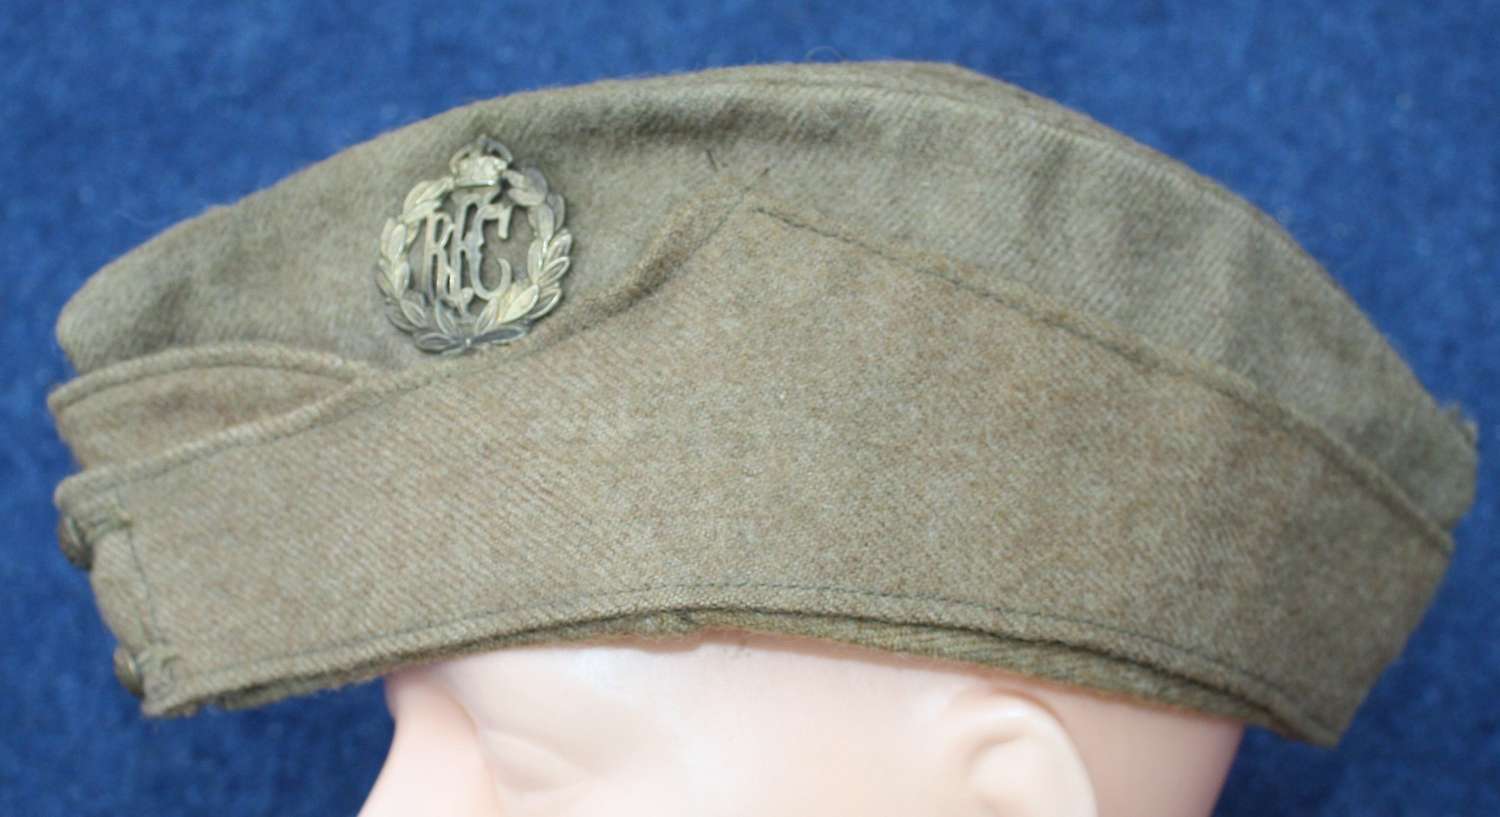 RFC Other Ranks Khaki Side Cap Stamped 51 over WD over P